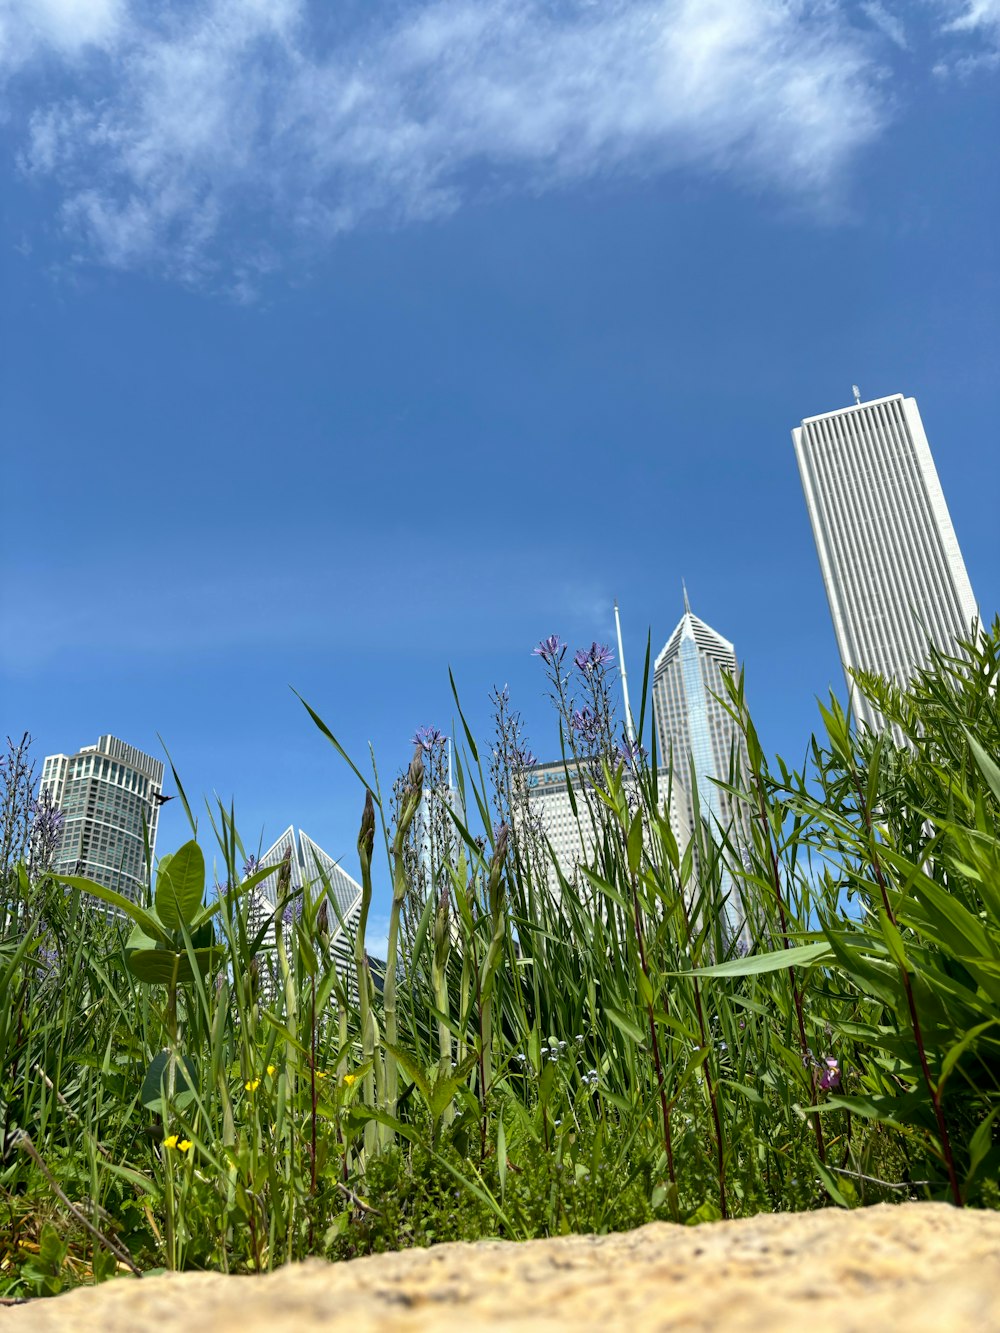 a view of a city from the ground with tall buildings in the background